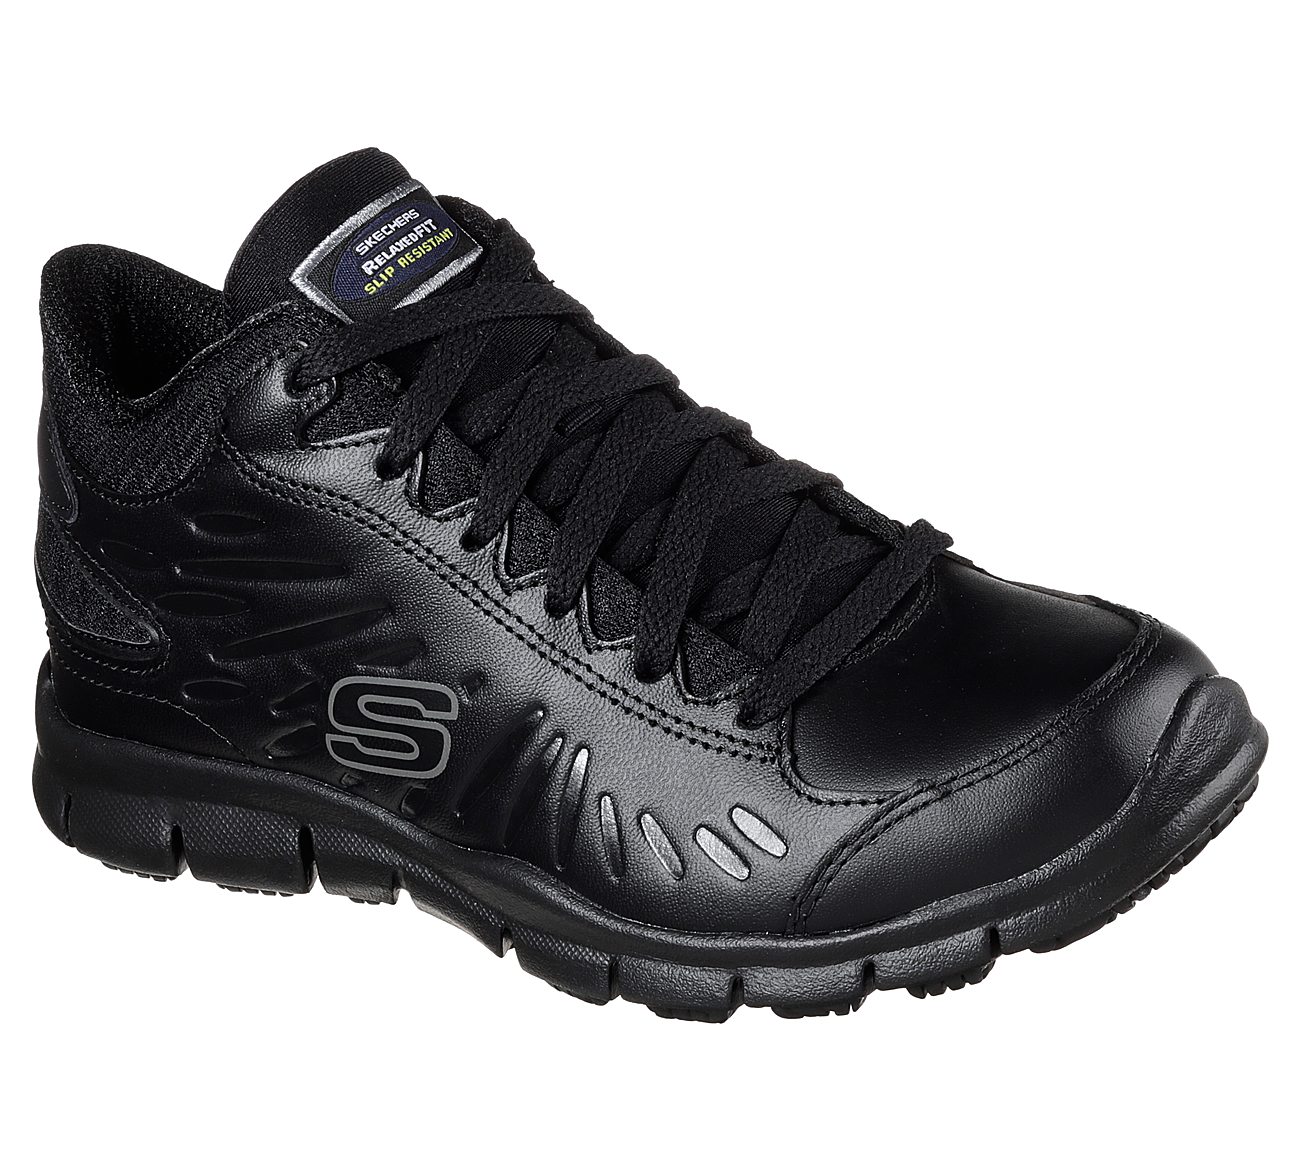 Buy SKECHERS Work Relaxed Fit: Eldred - Linton SR Work Shoes